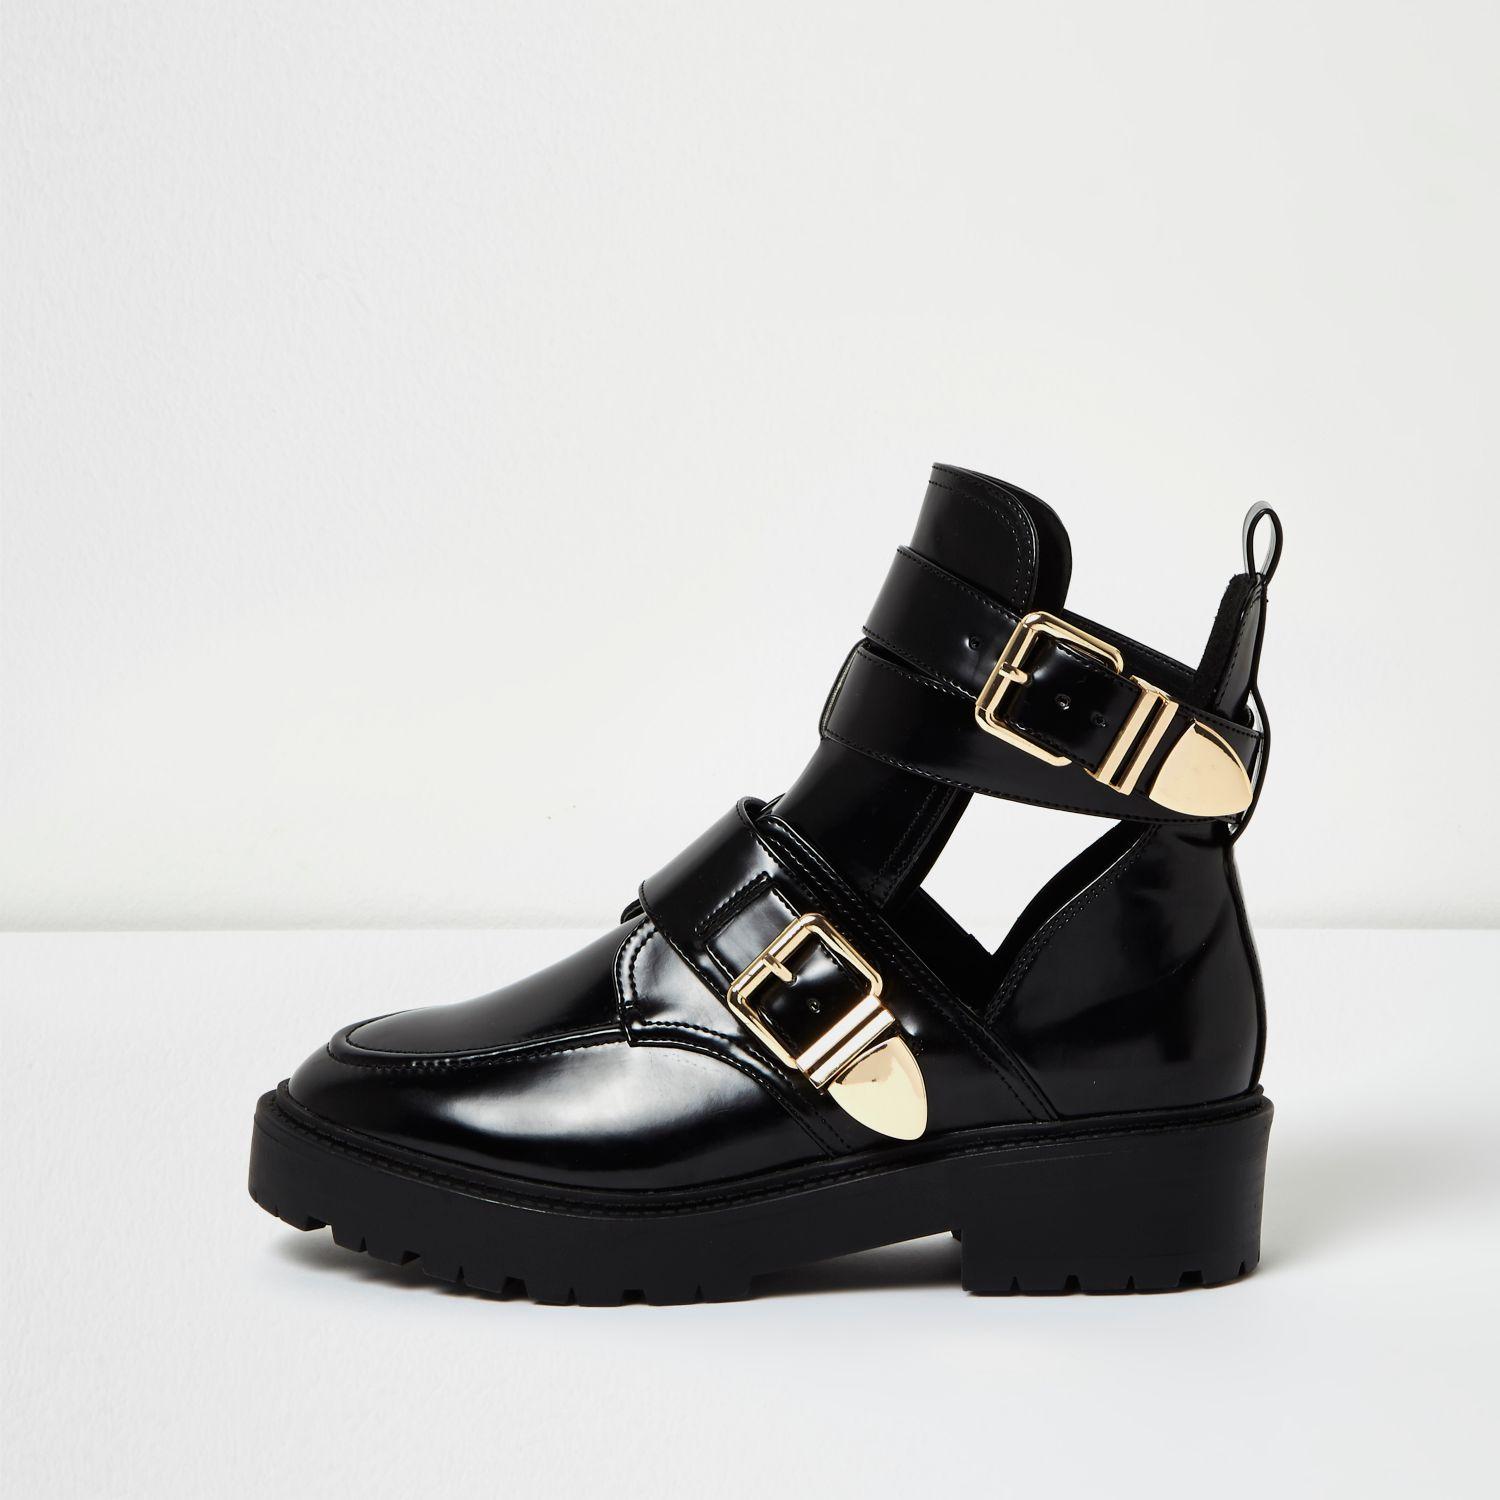 River Island Black Patent Wide Fit Cut-out Buckle Boots - Lyst